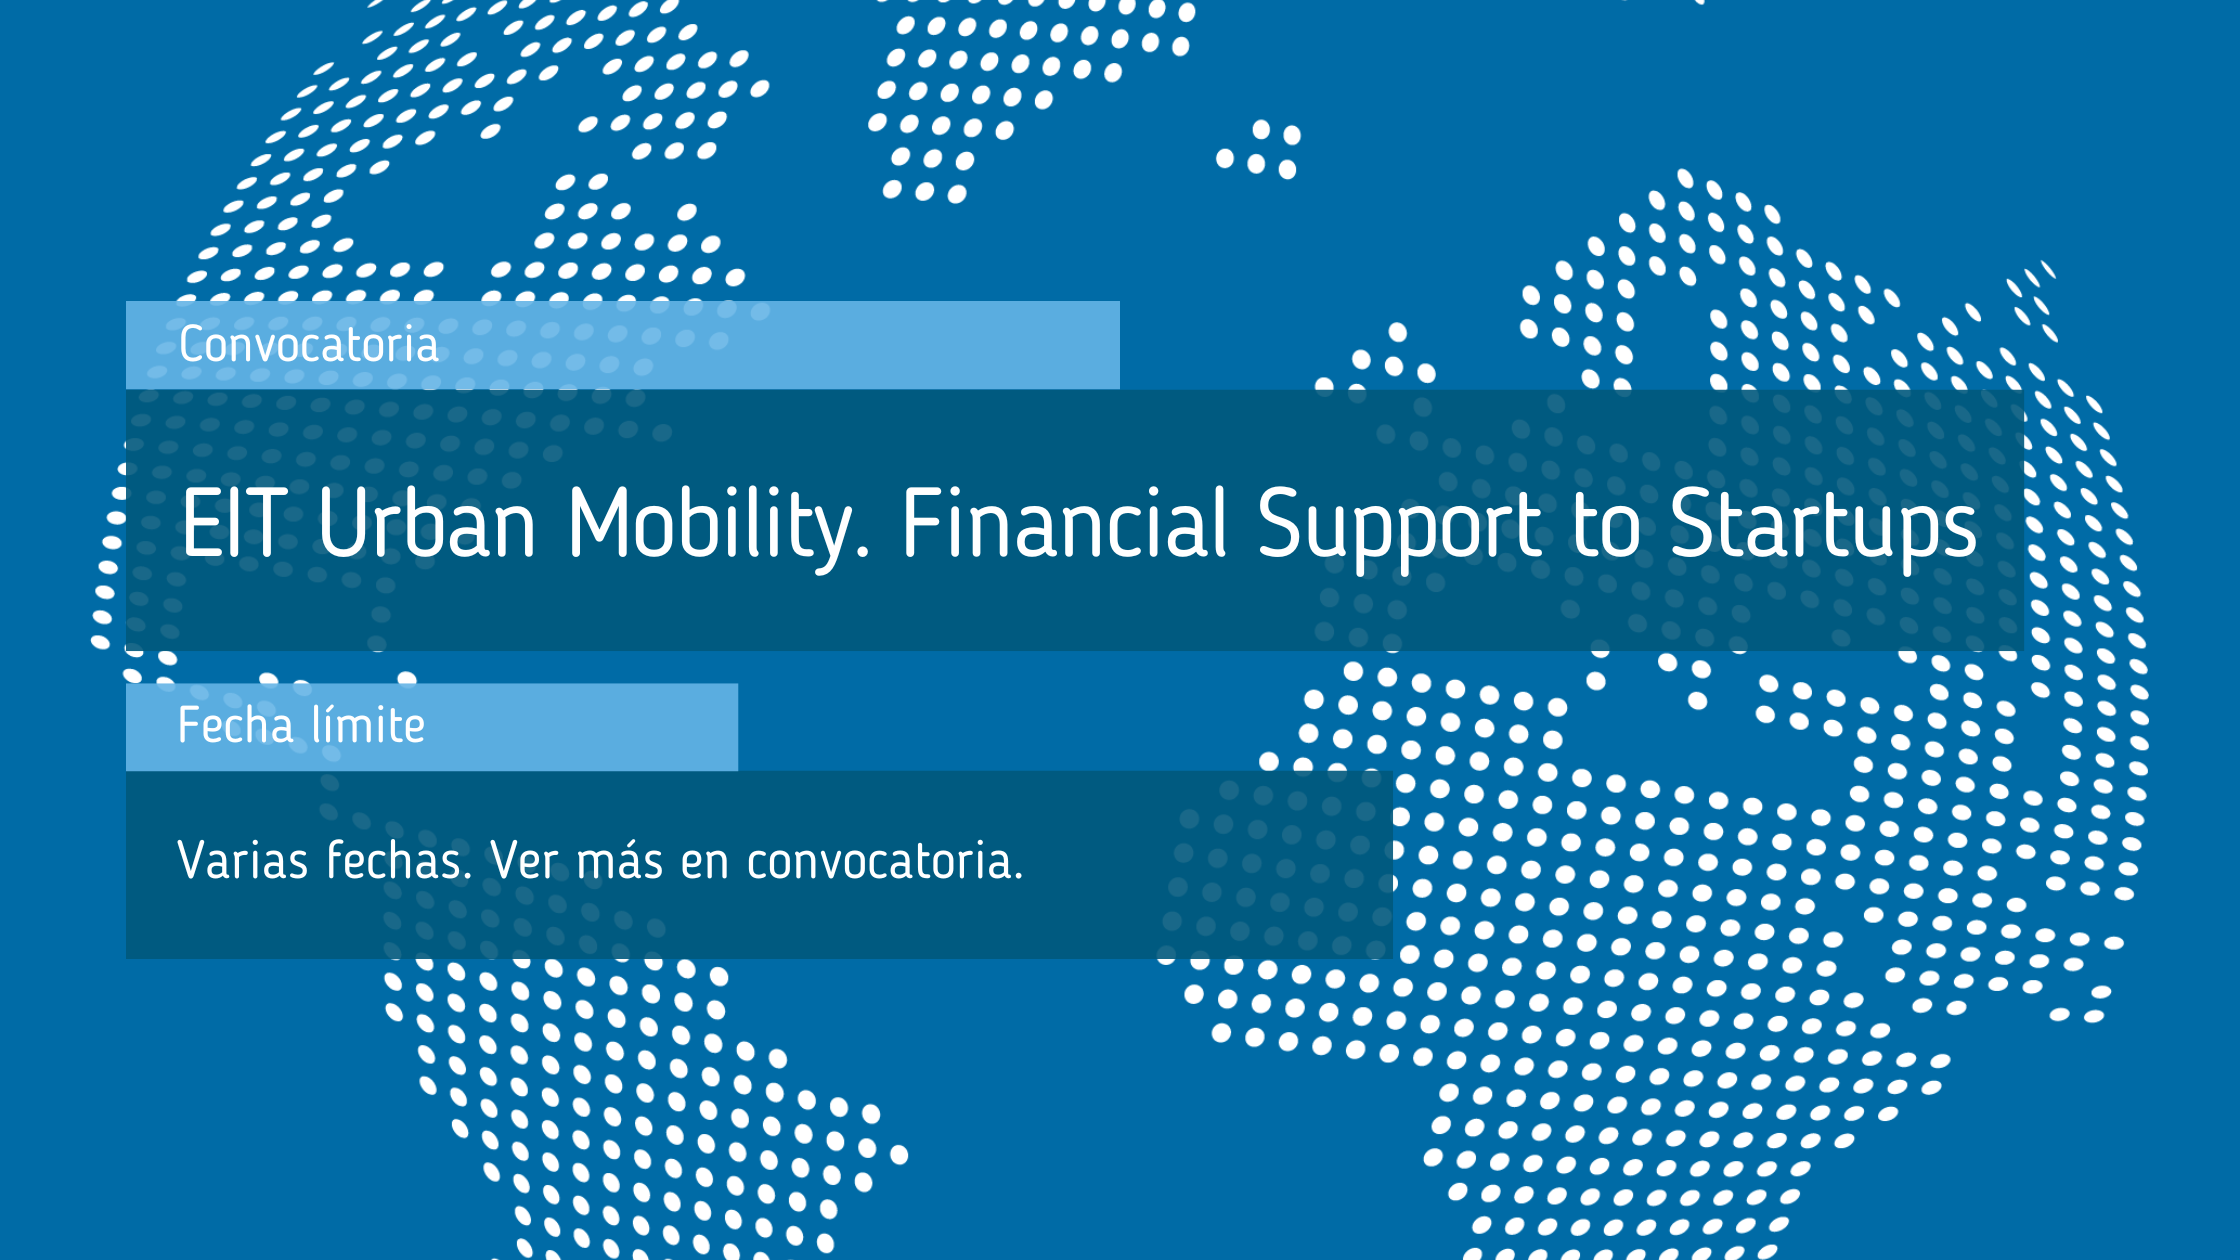 EIT_Urban_Mobility_Financial_Support_to_Startups